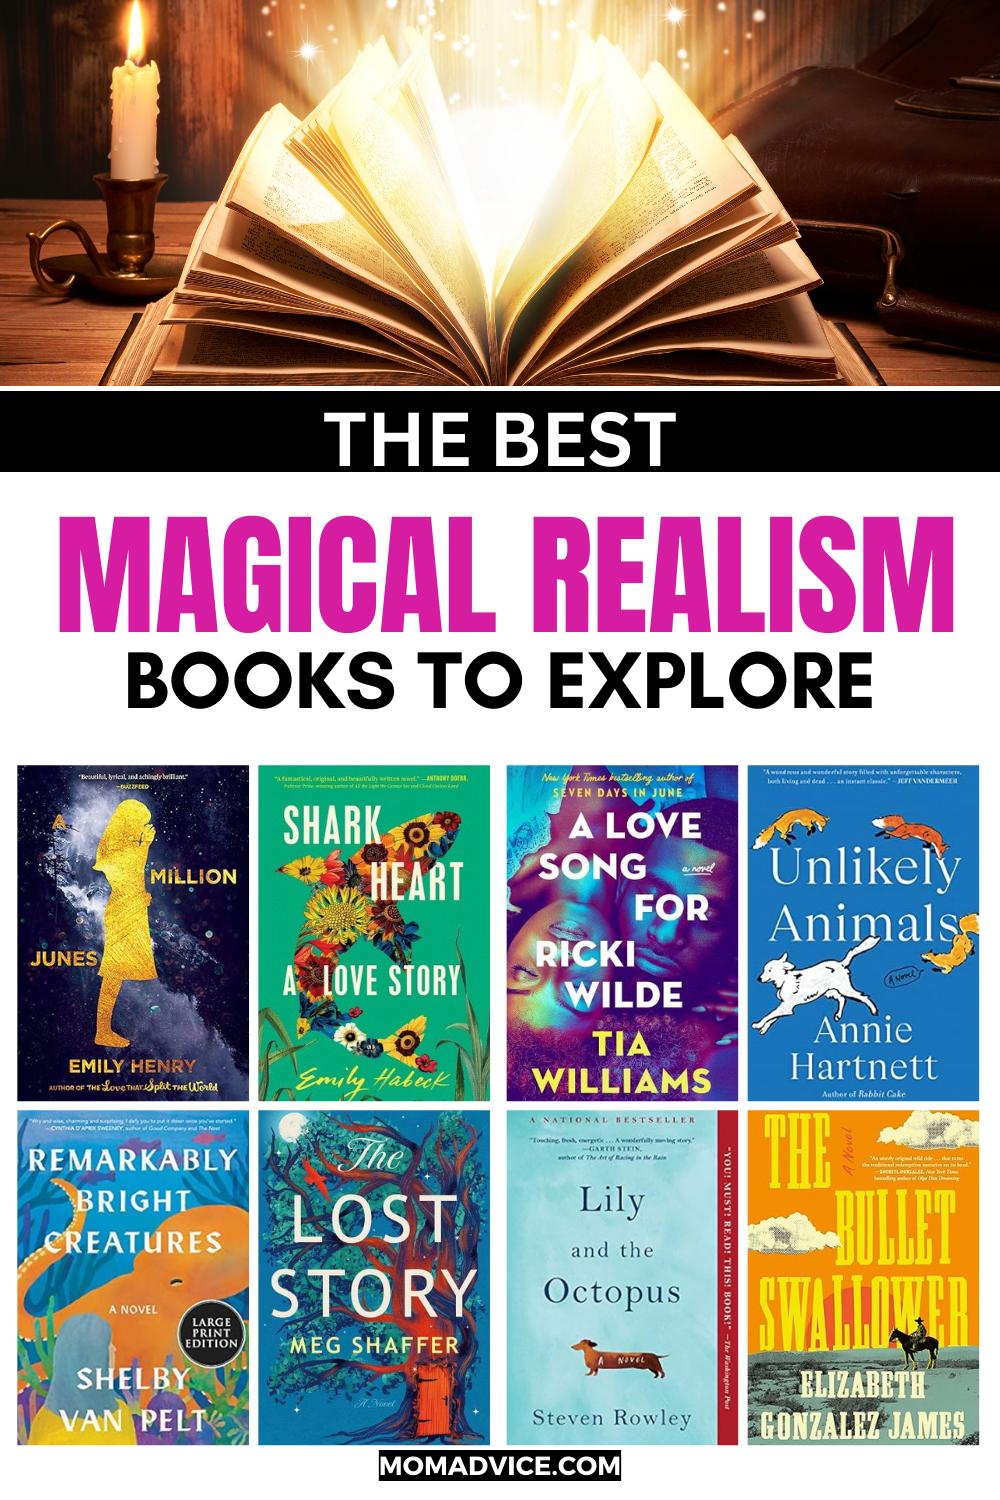 The Best Magical Realism Books to Read Now